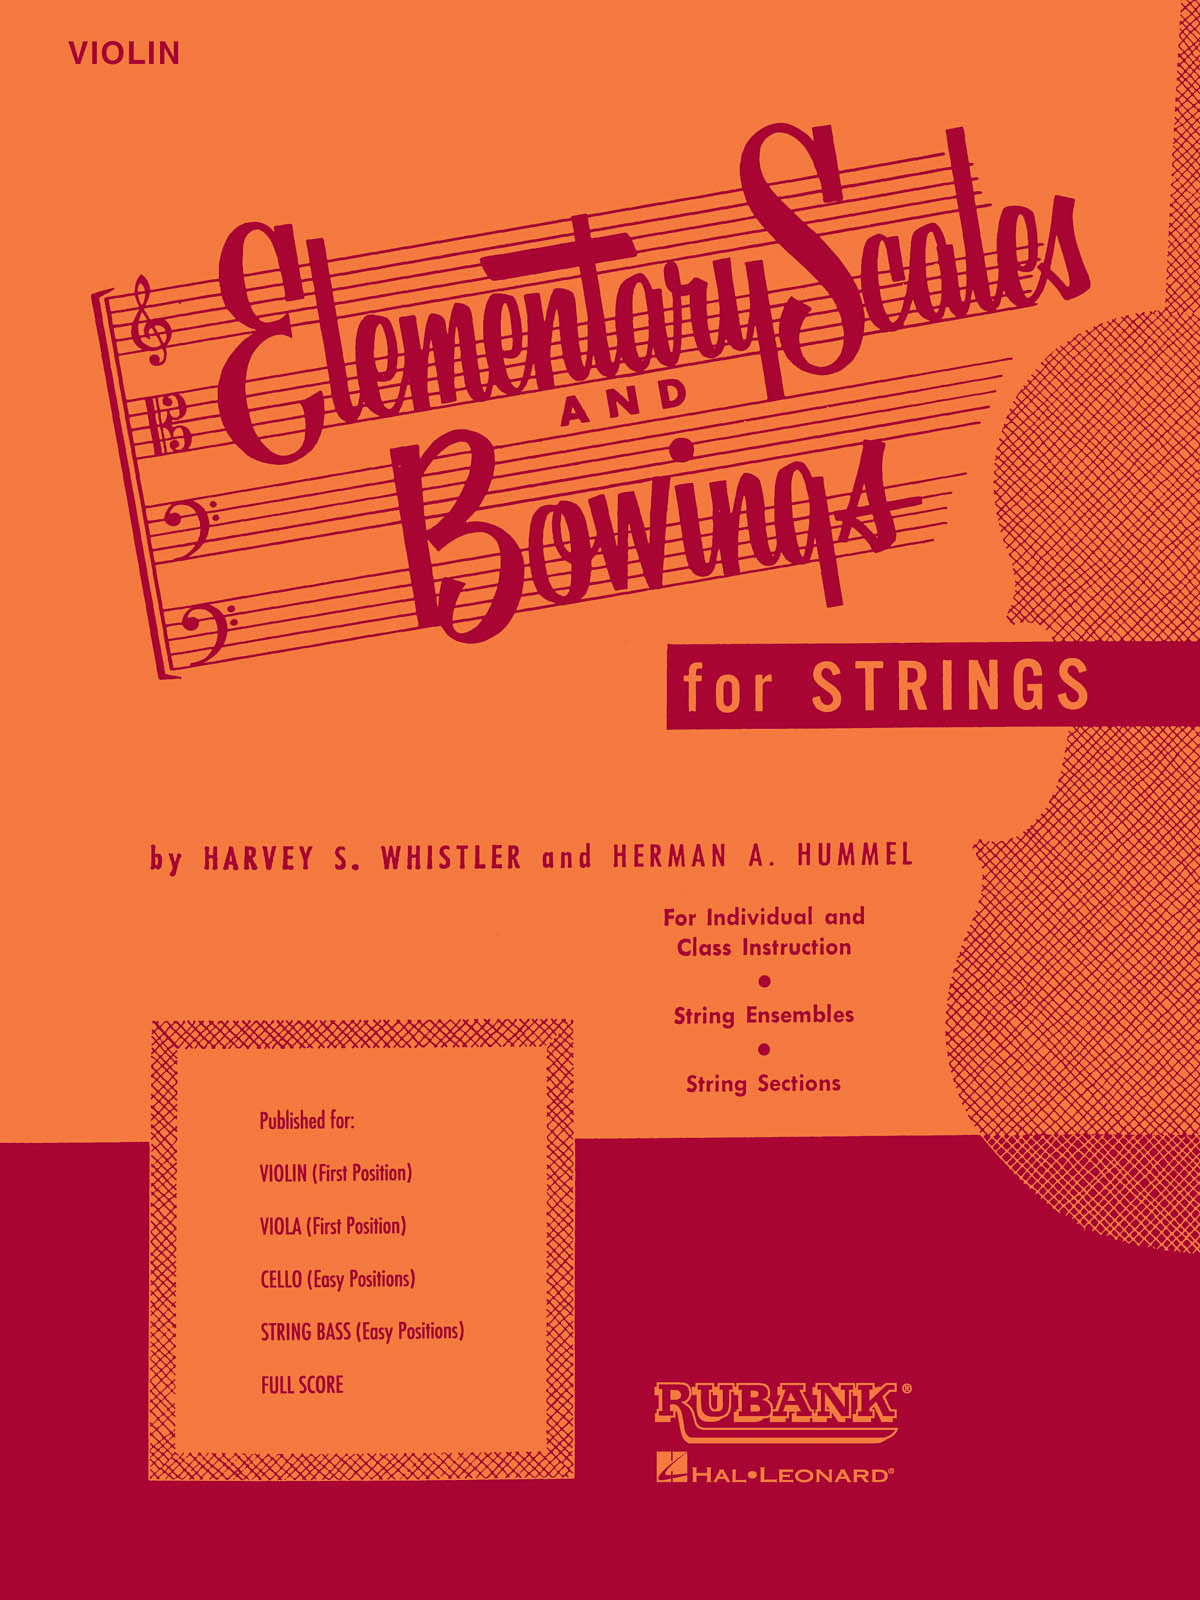 Elementary Scales and Bowings-Violin (First Position)